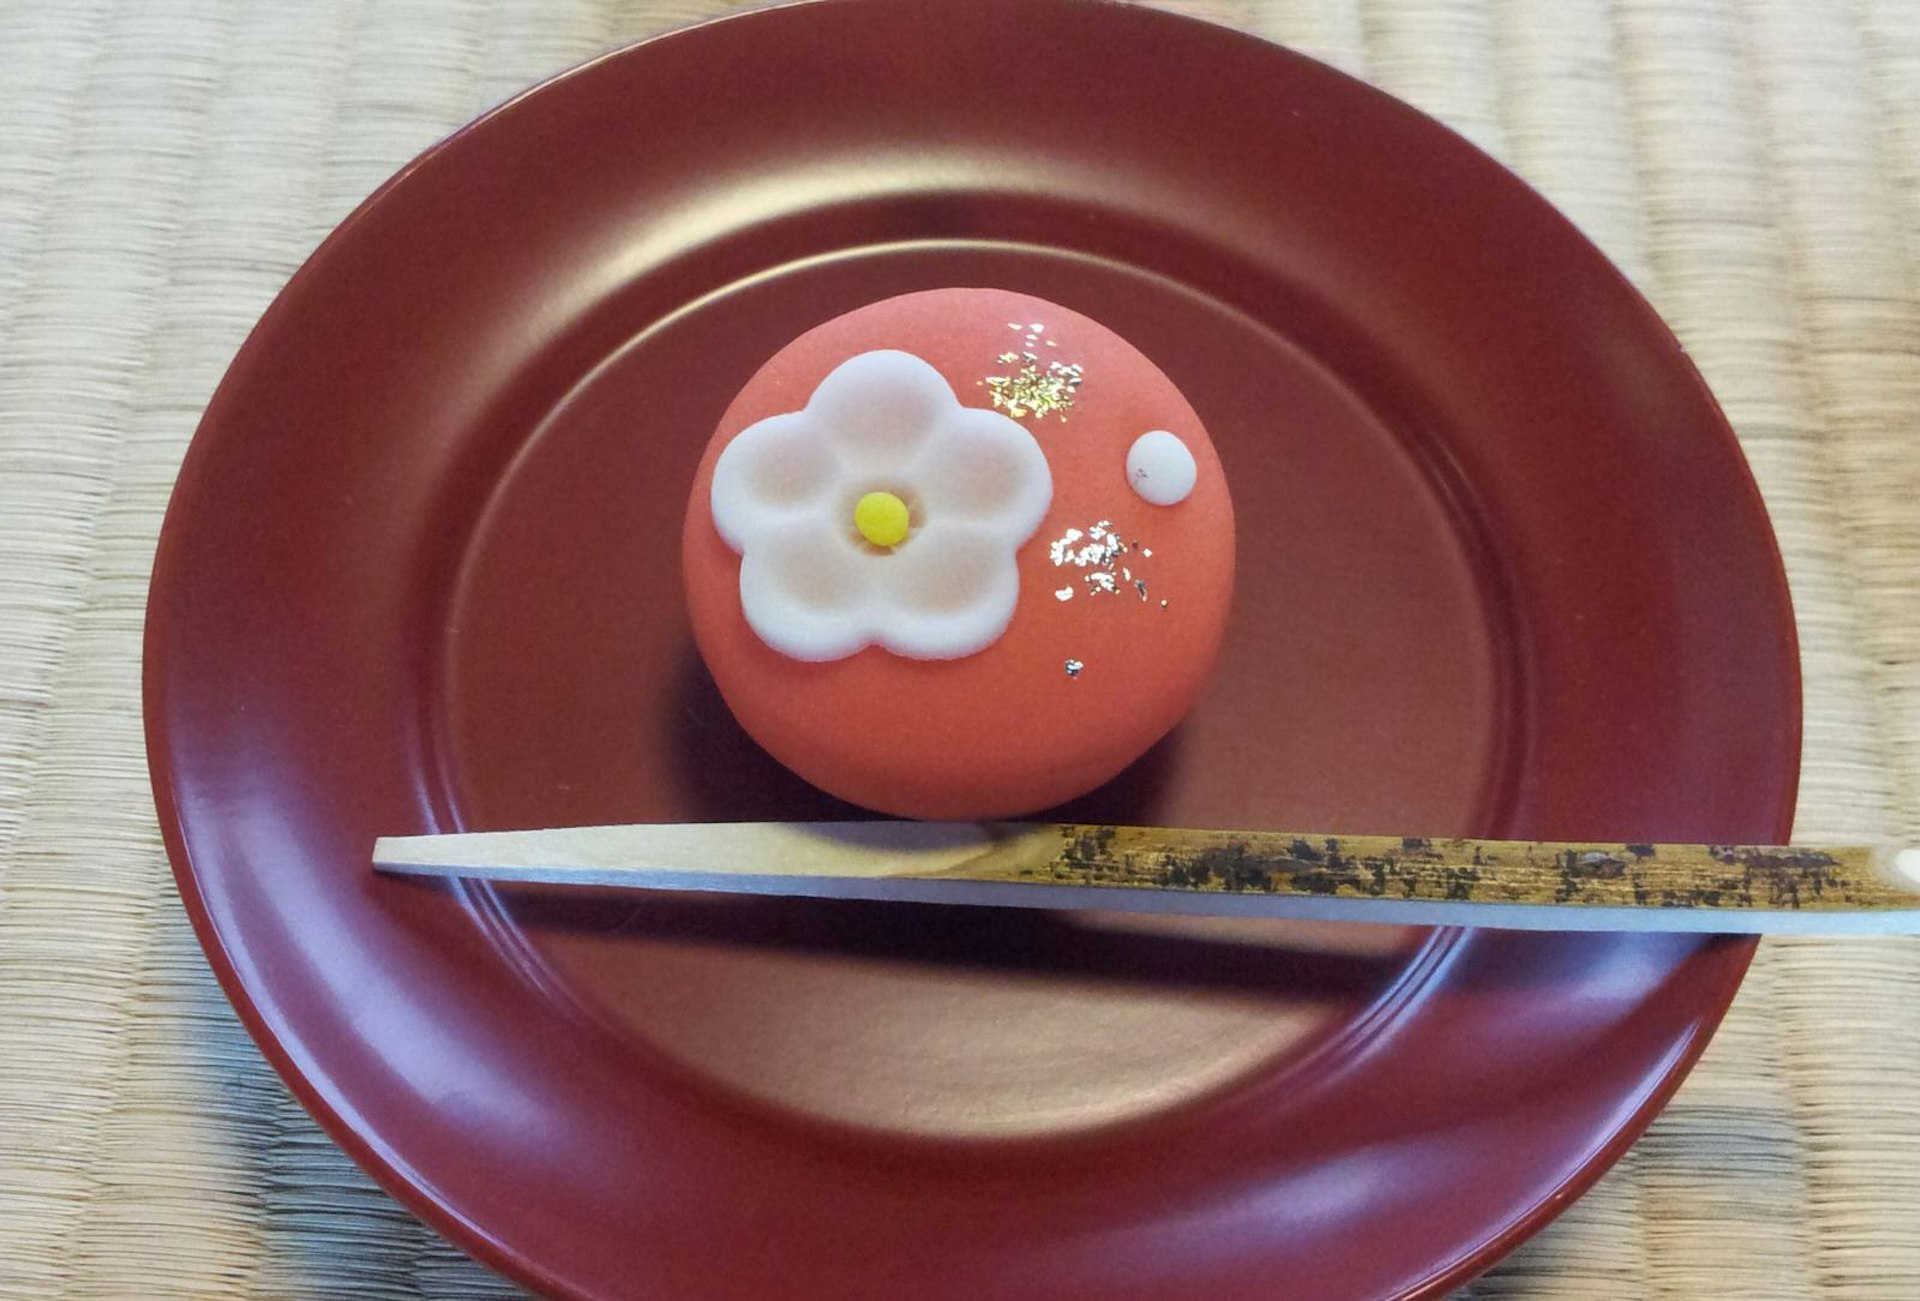 Picture-perfect wagashi (Japanese sweet) at Konomien